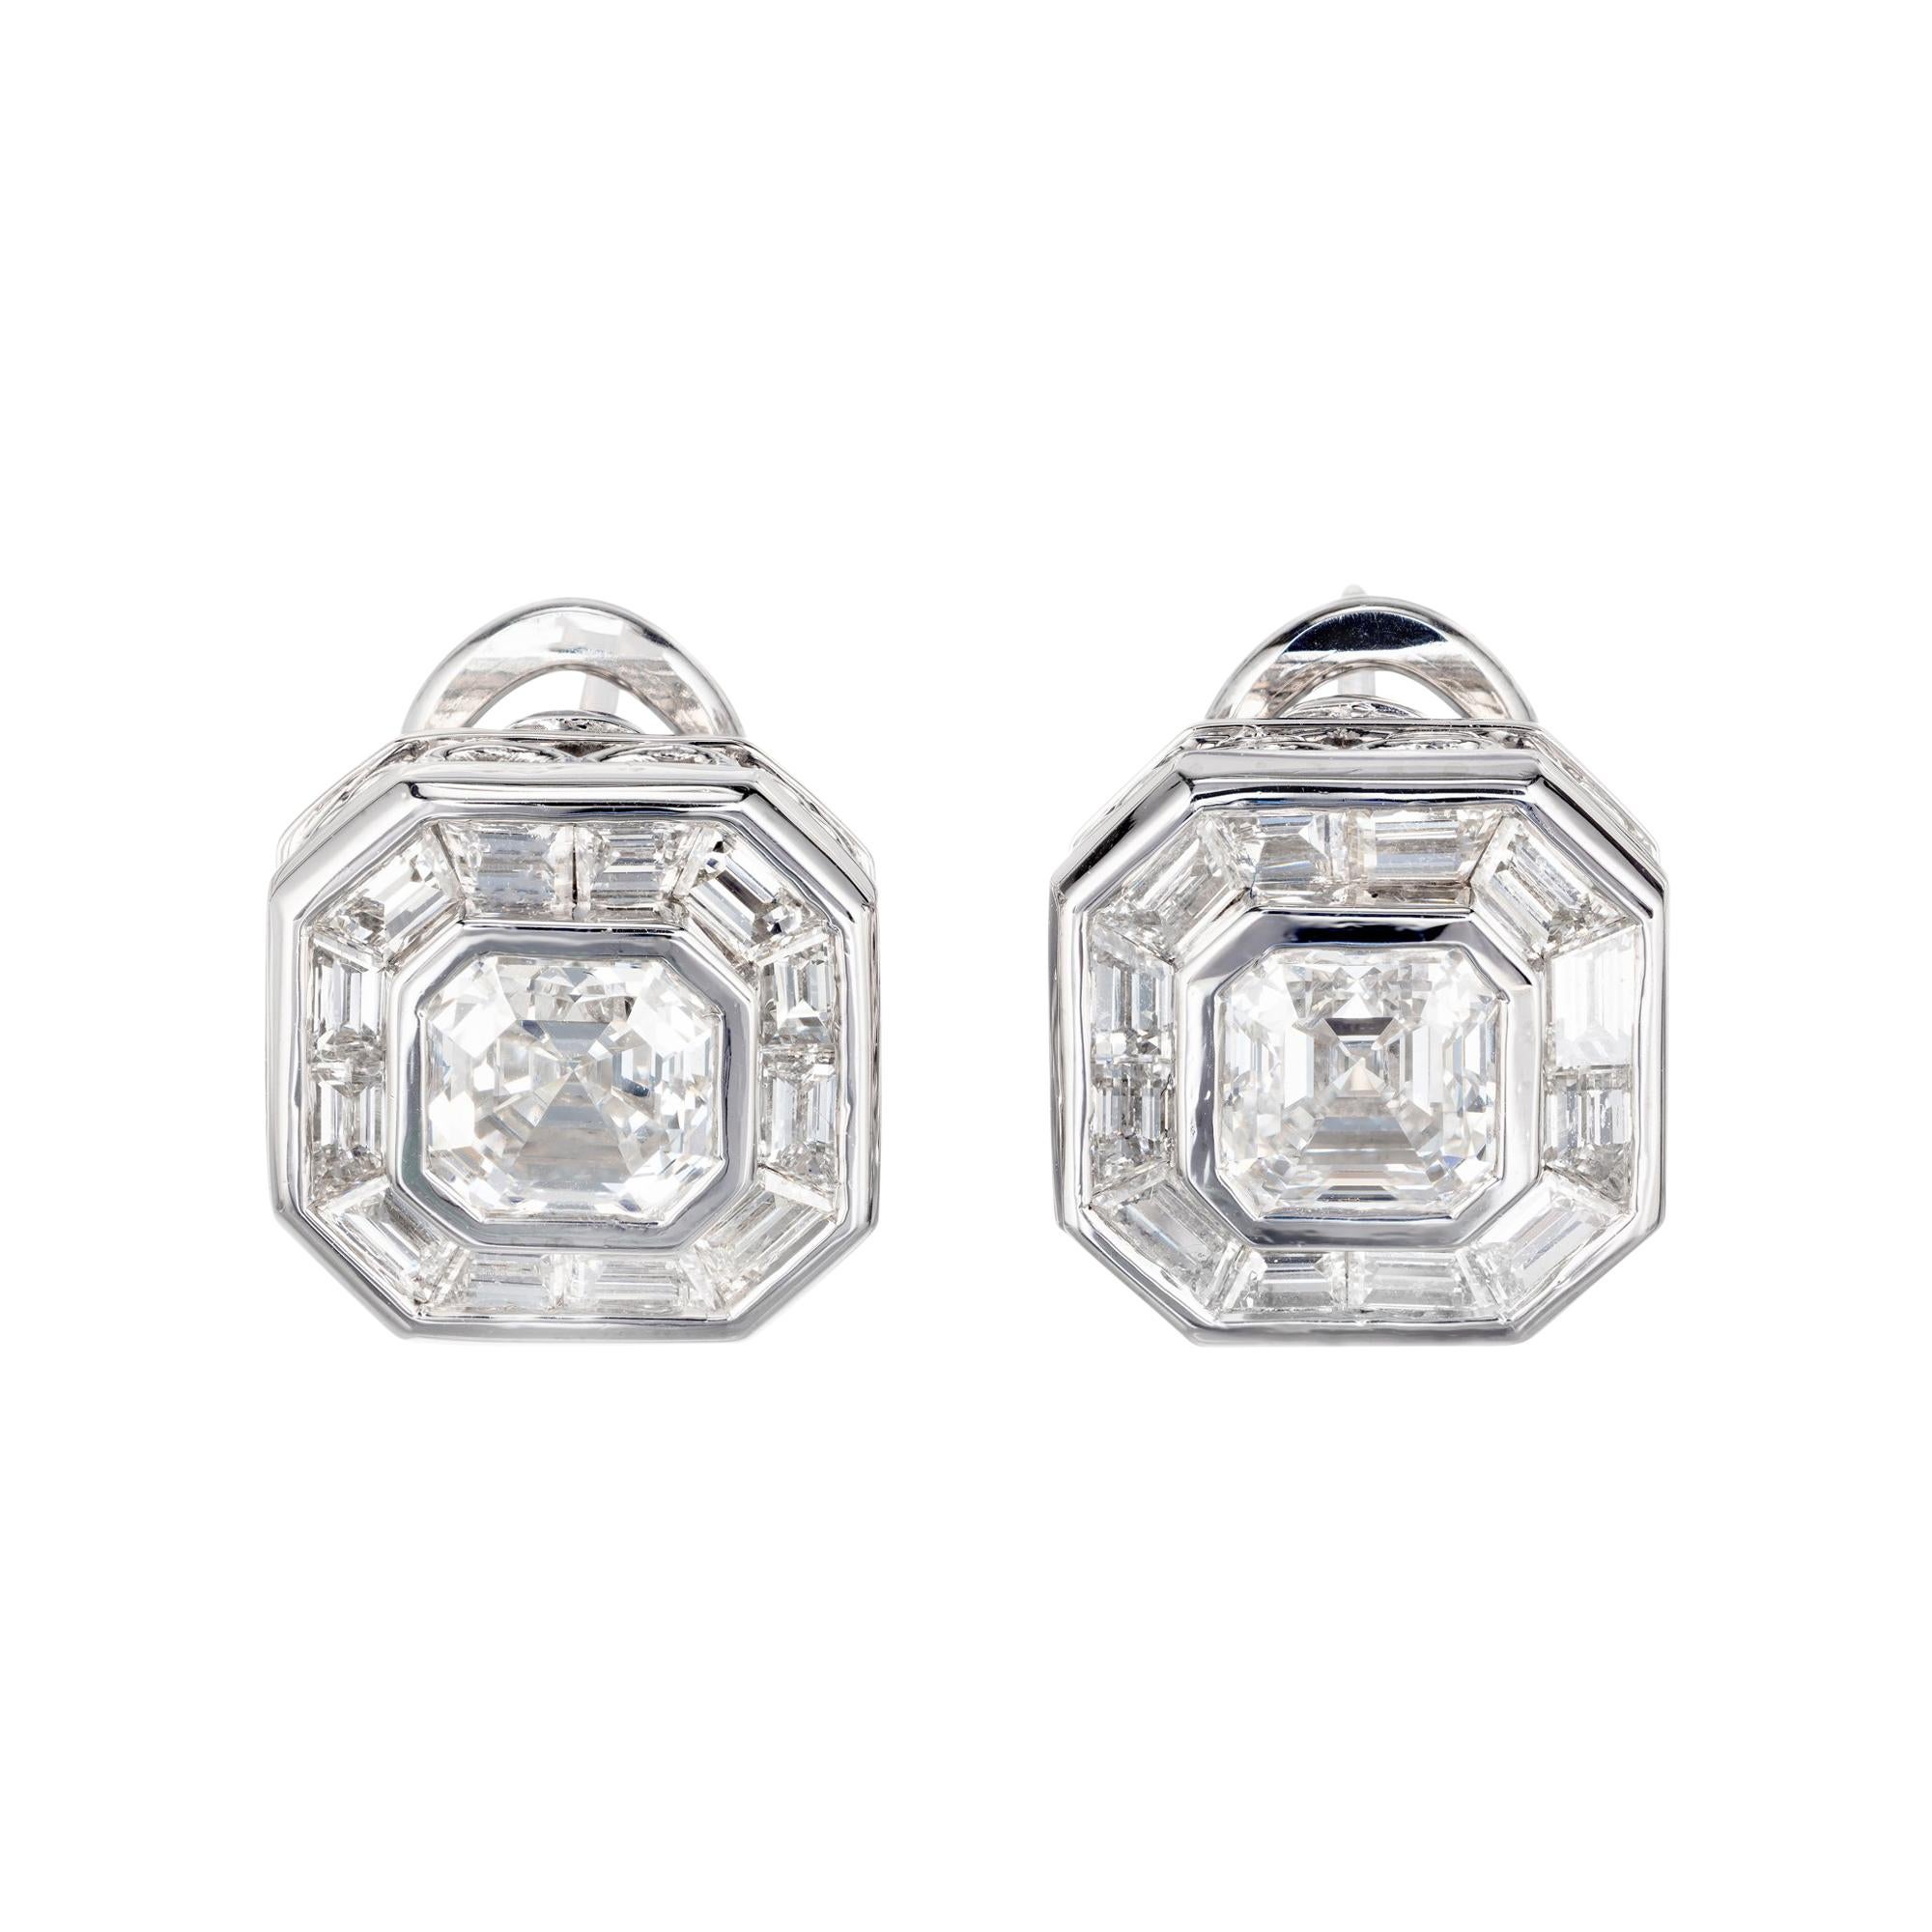 Peter Suchy GIA Certified 2.04 Carat Diamond Platinum Earrings For Sale